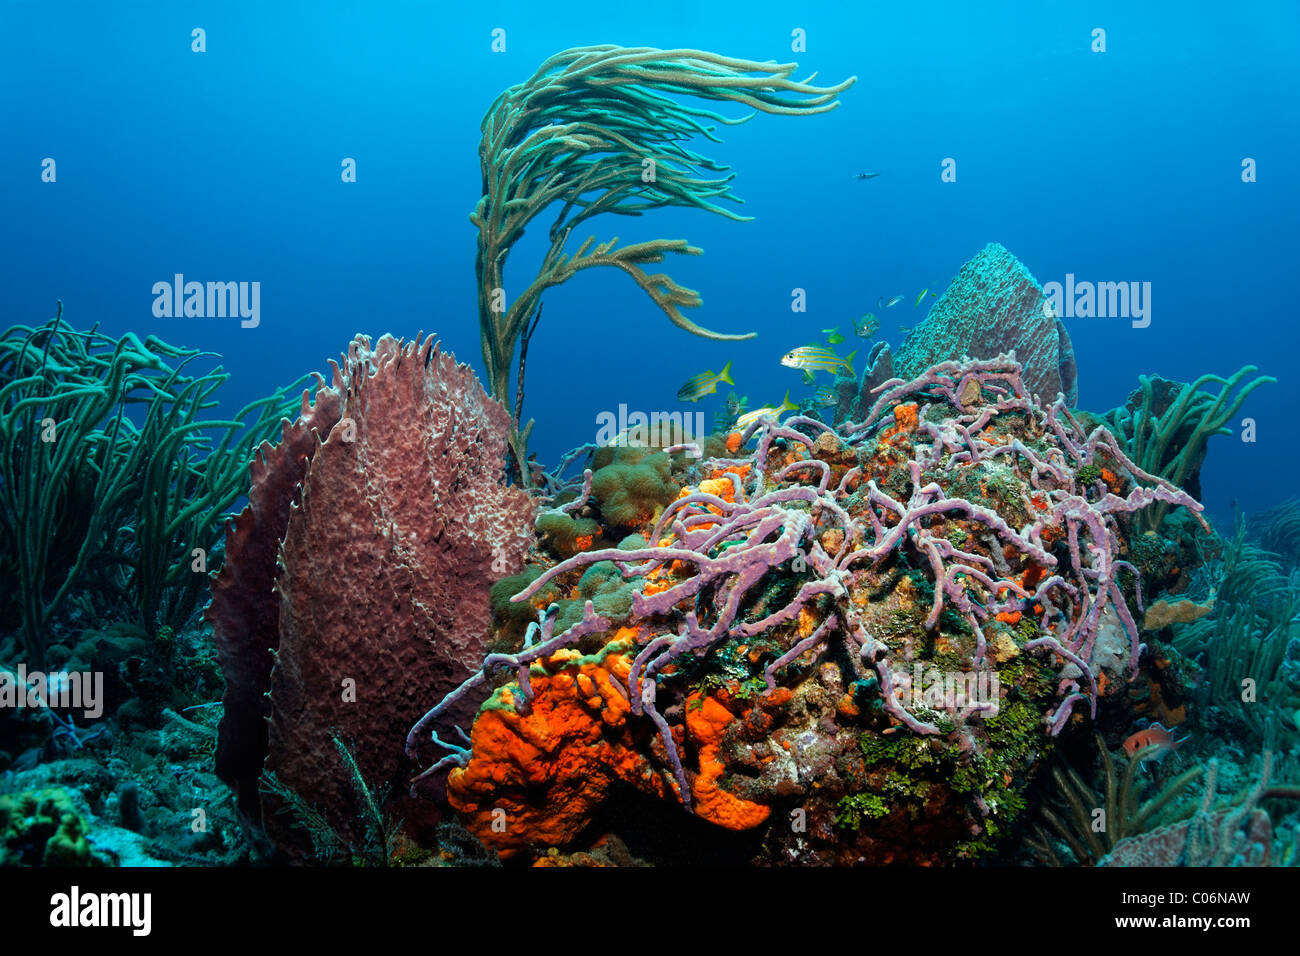 Overgrown reef block in a coral reef, various colourful secies of sponges and corals, Little Tobago, Speyside Stock Photo